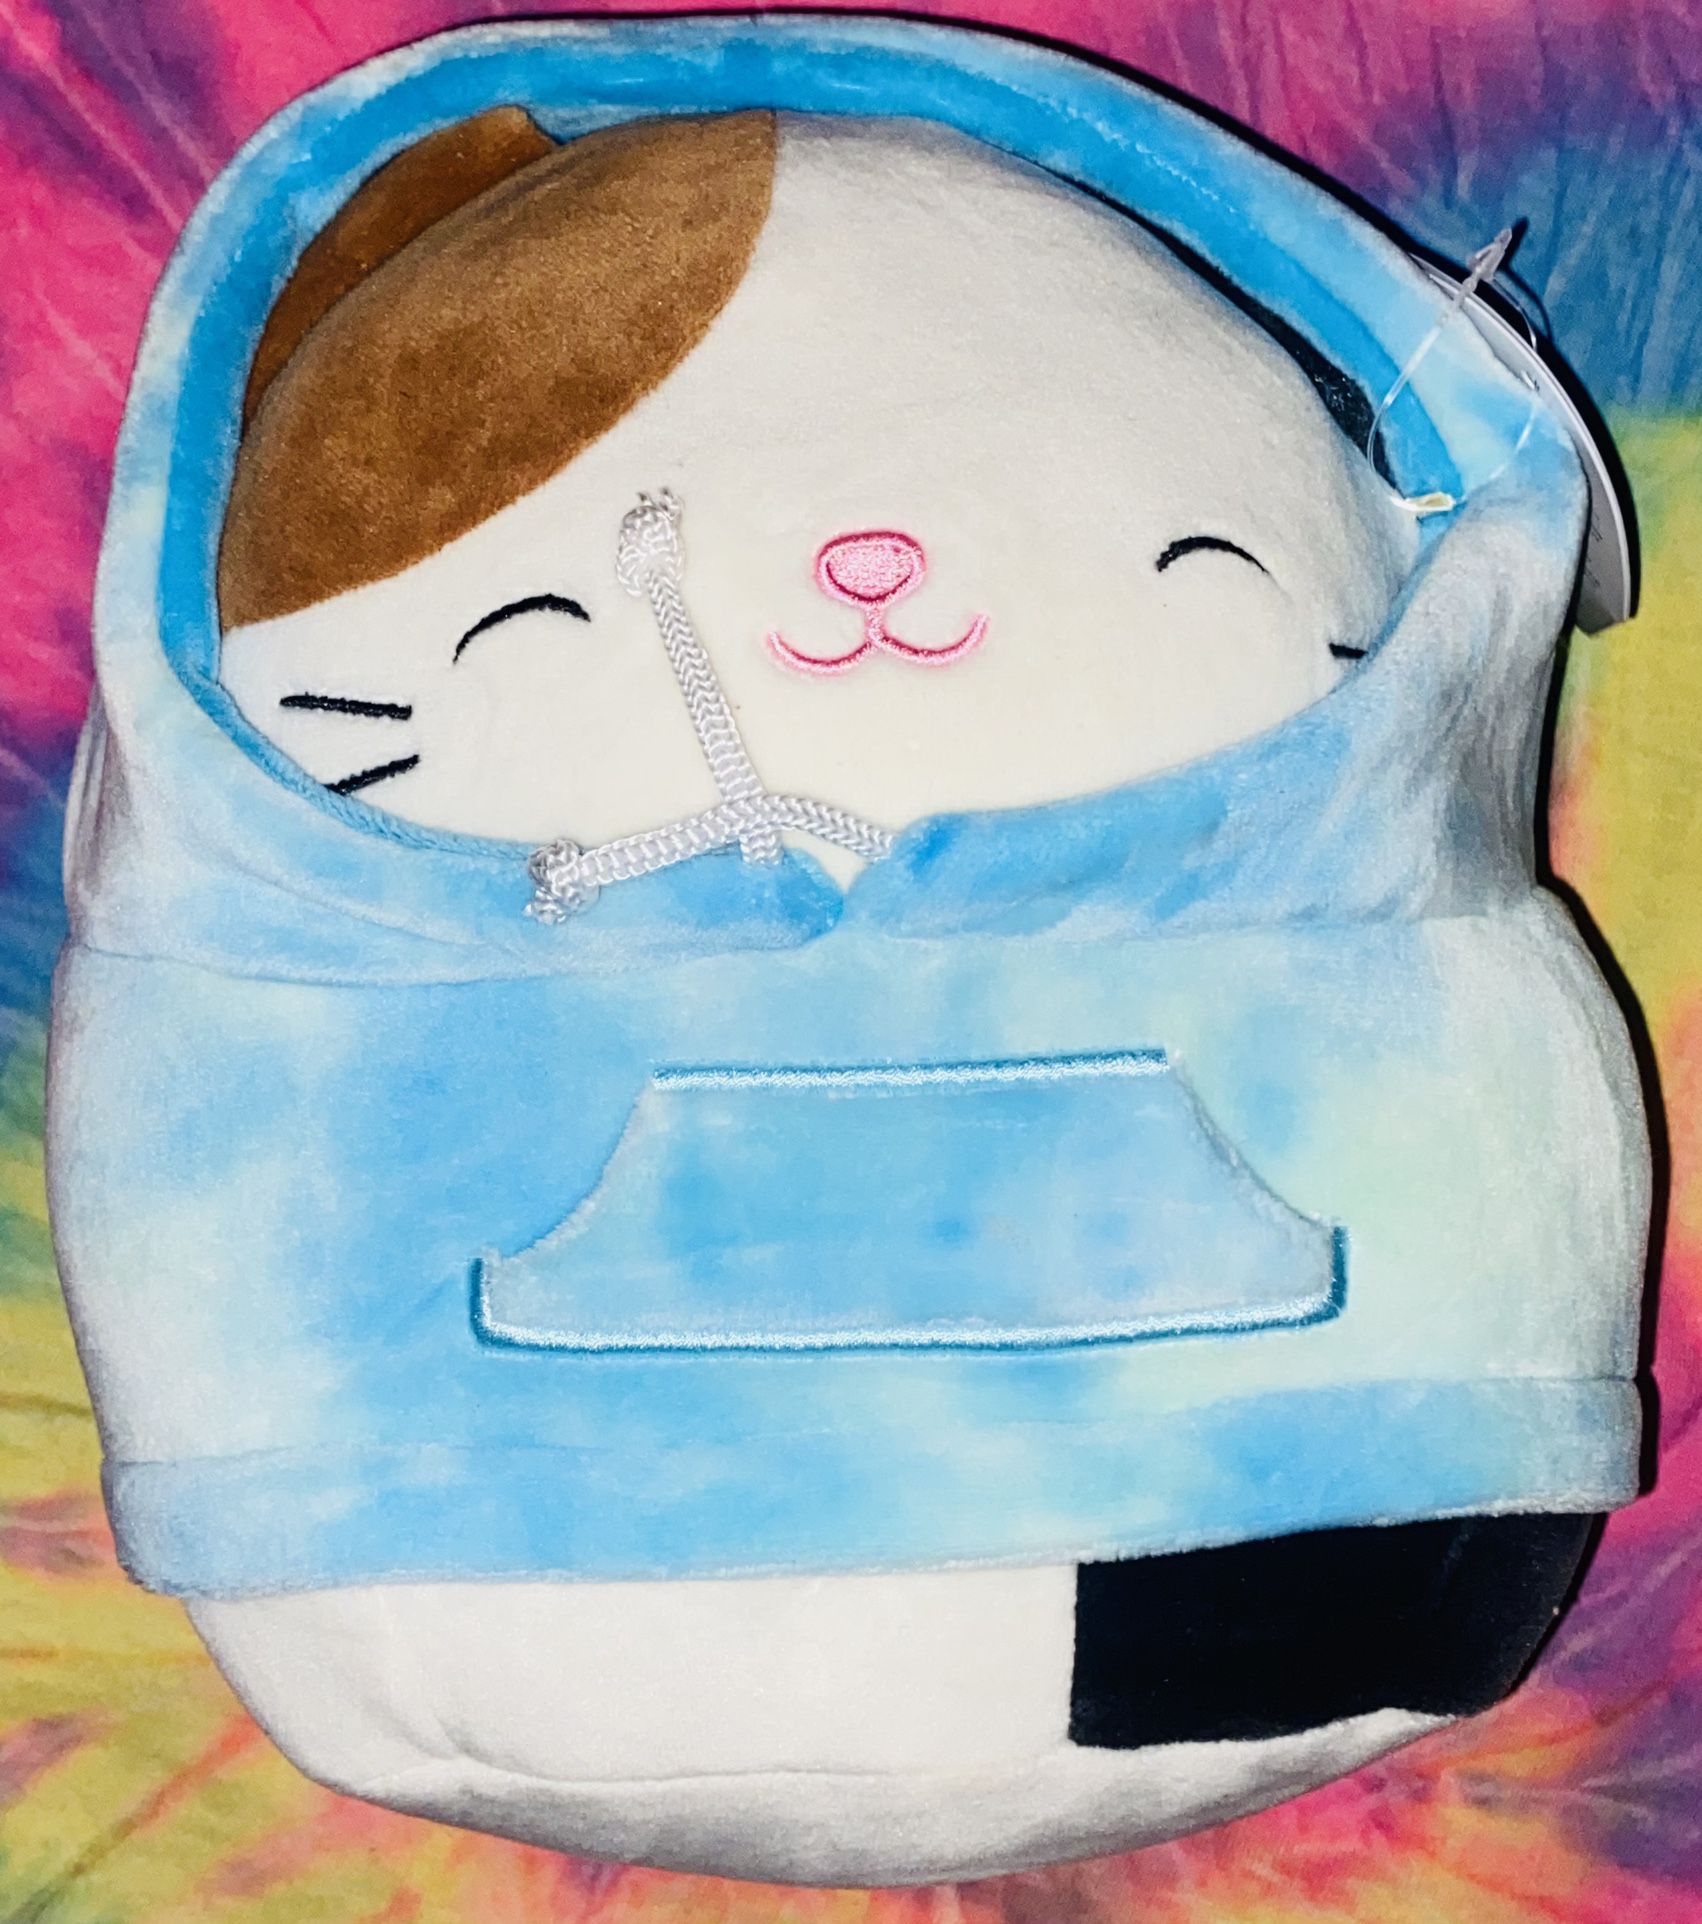 🟤🐱🔷🐈⚫️🎀✨SQUISHMALLOWS 12” (CAM)THE CAT🐈HOODIE SQUAD PLUSH STUFFED TOY💕🦋🟤🐱🤍🐈✨